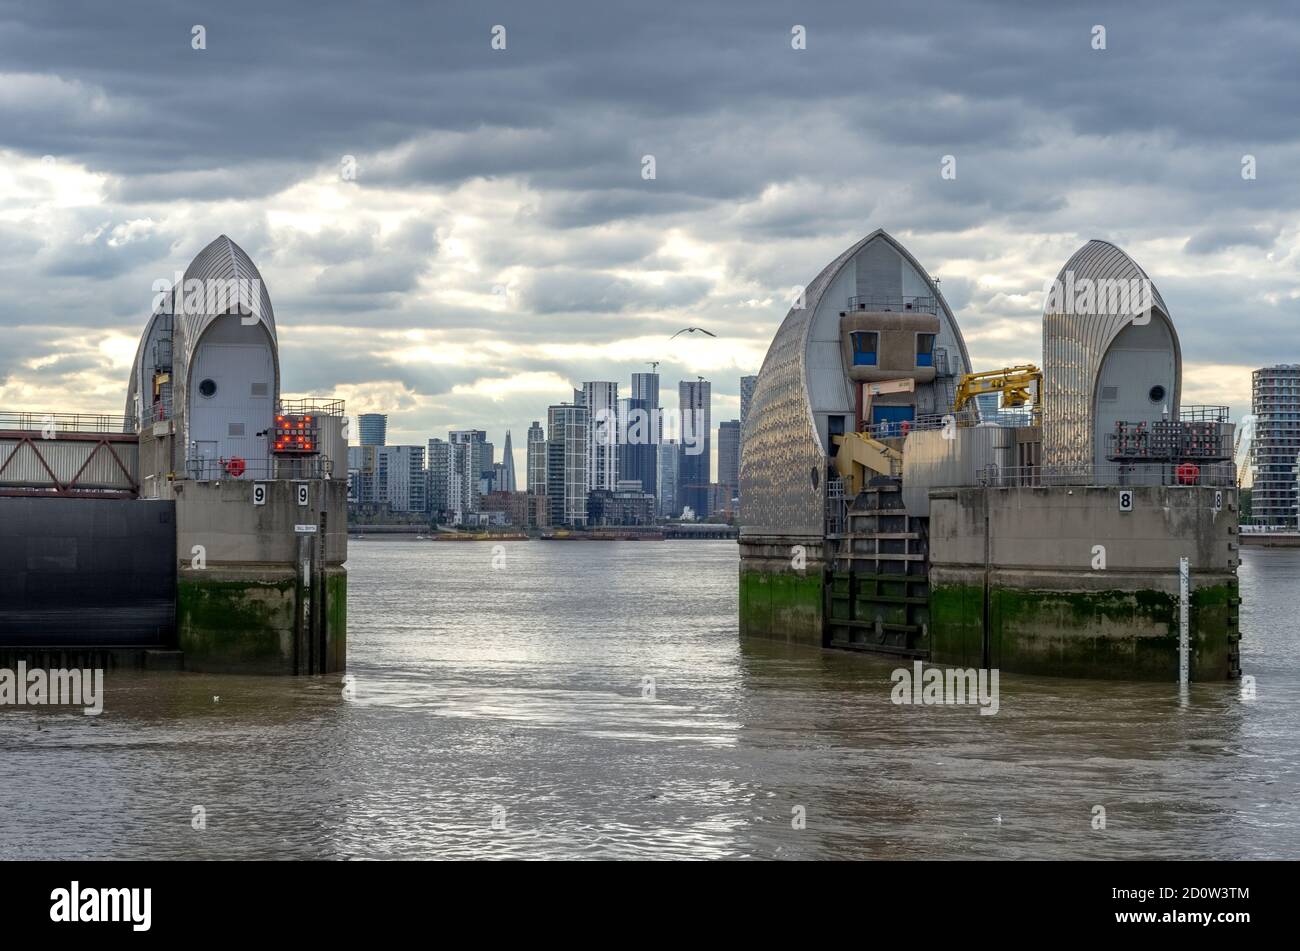 Thames Barrier on the River Thames against the Canary Wharf skyline, London Stock Photo